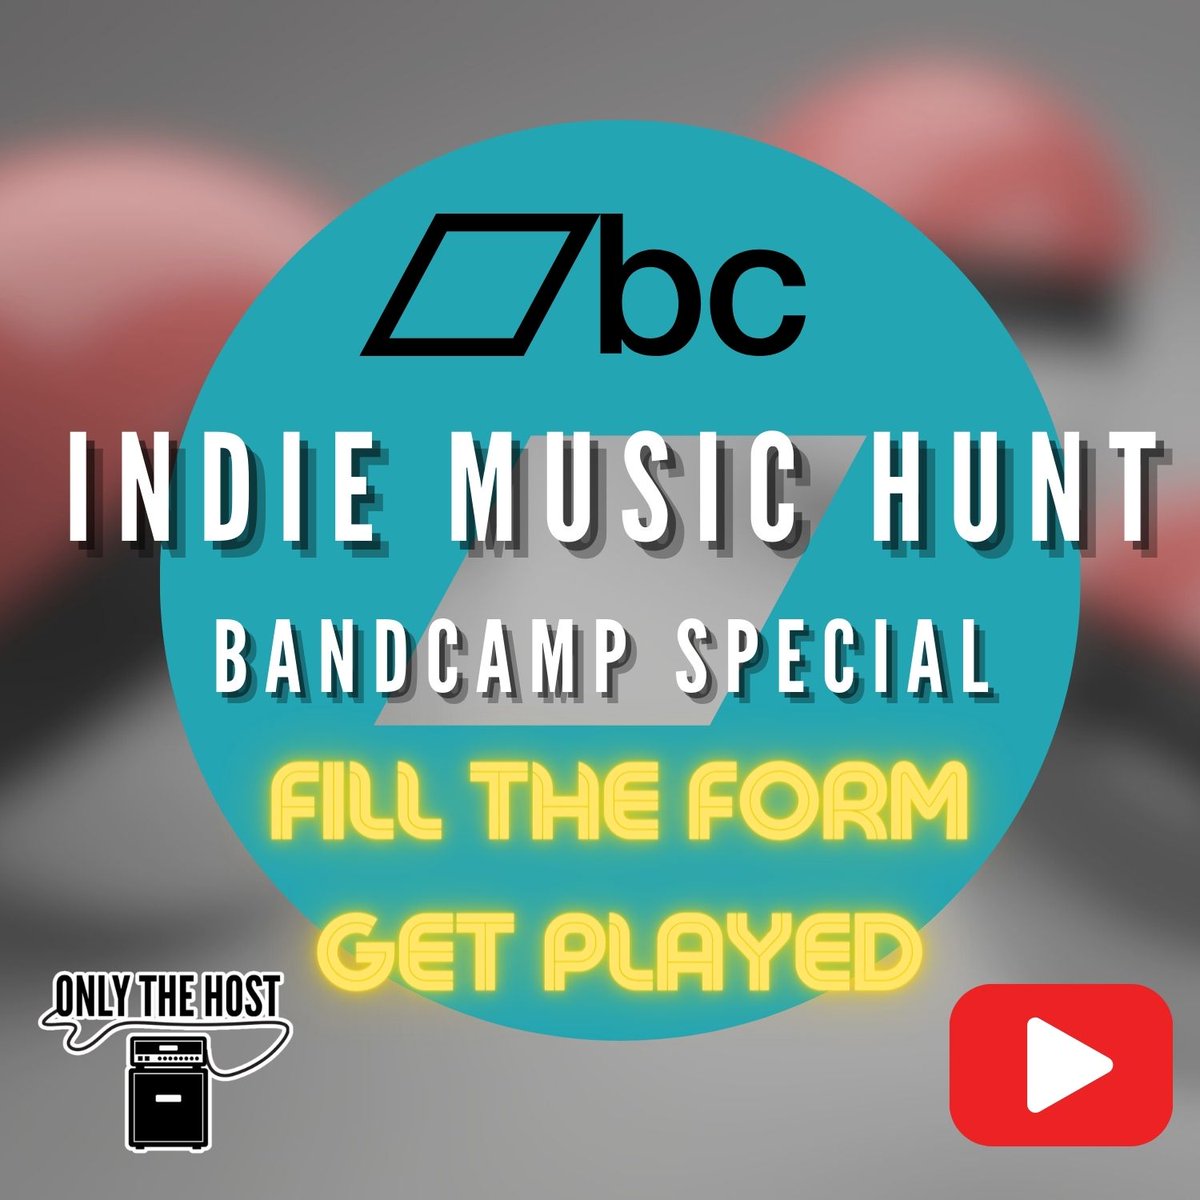 Get your music heard!  It's Wednesday That means we are playing songs from bandcamp!  Please link to an individual track (Albums wont add to the playlister) #dothething

docs.google.com/forms/d/e/1FAI…